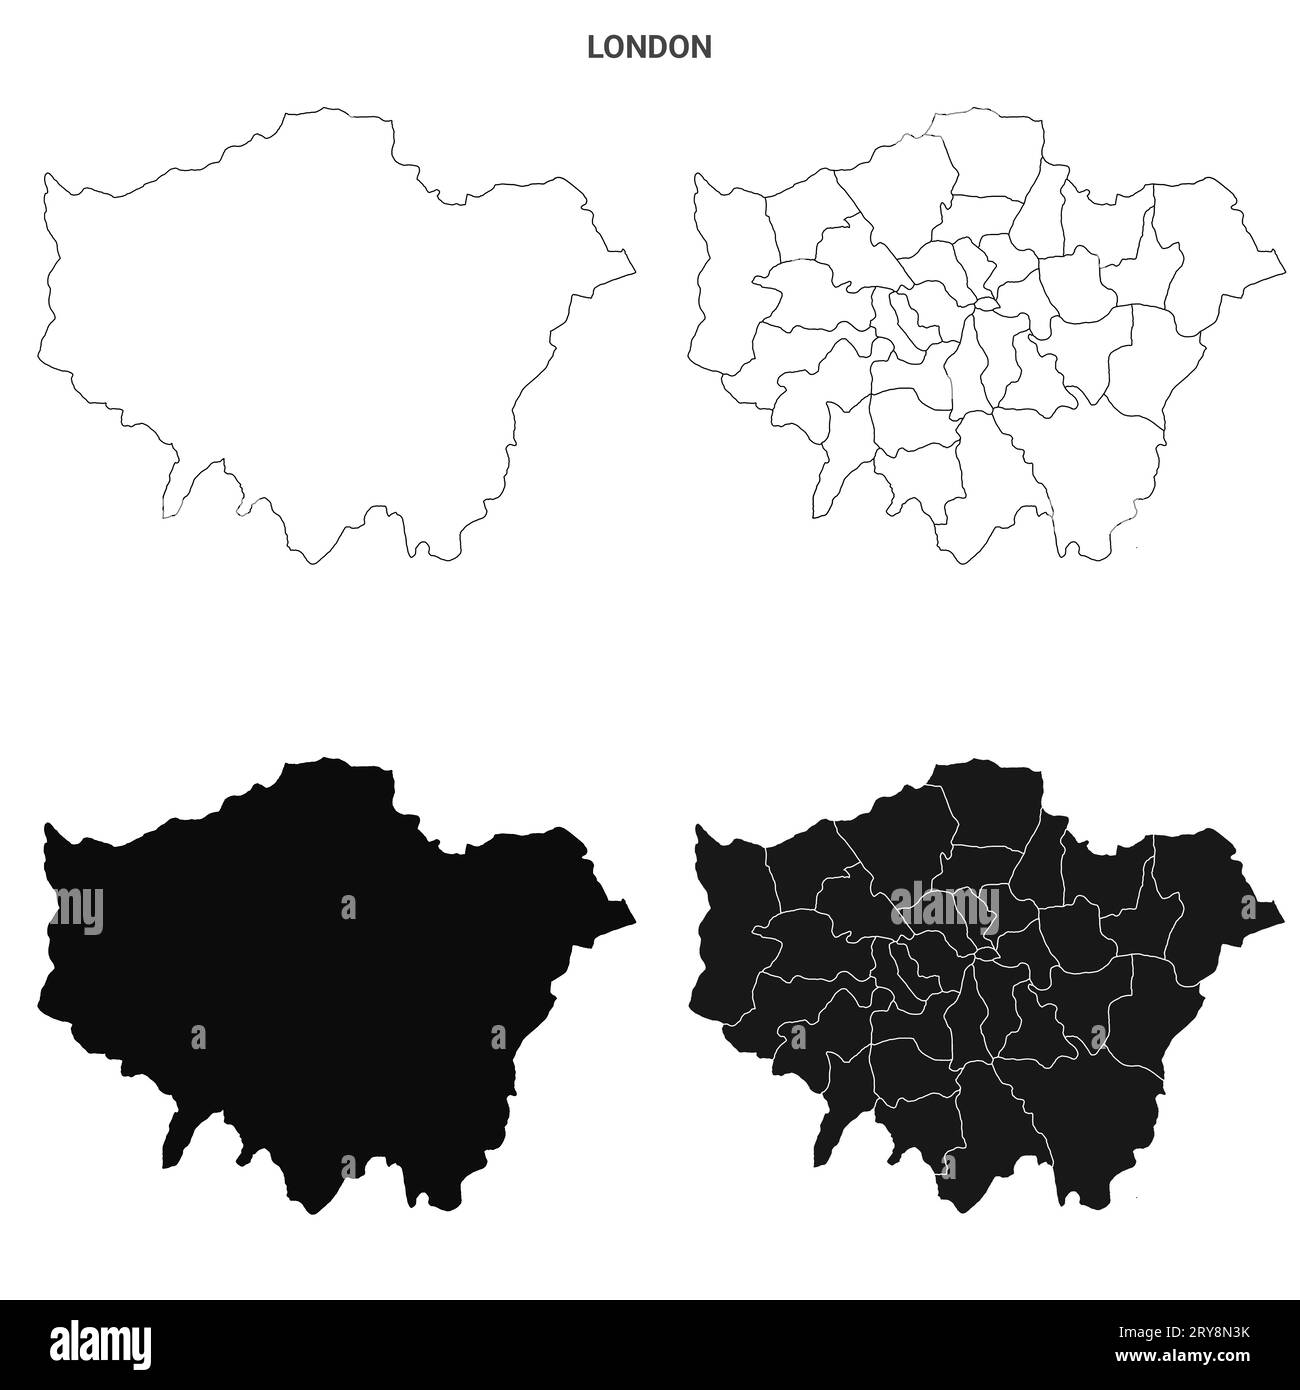 Greater London Administrative Map Set - blank counties or boroughs outline Stock Photo